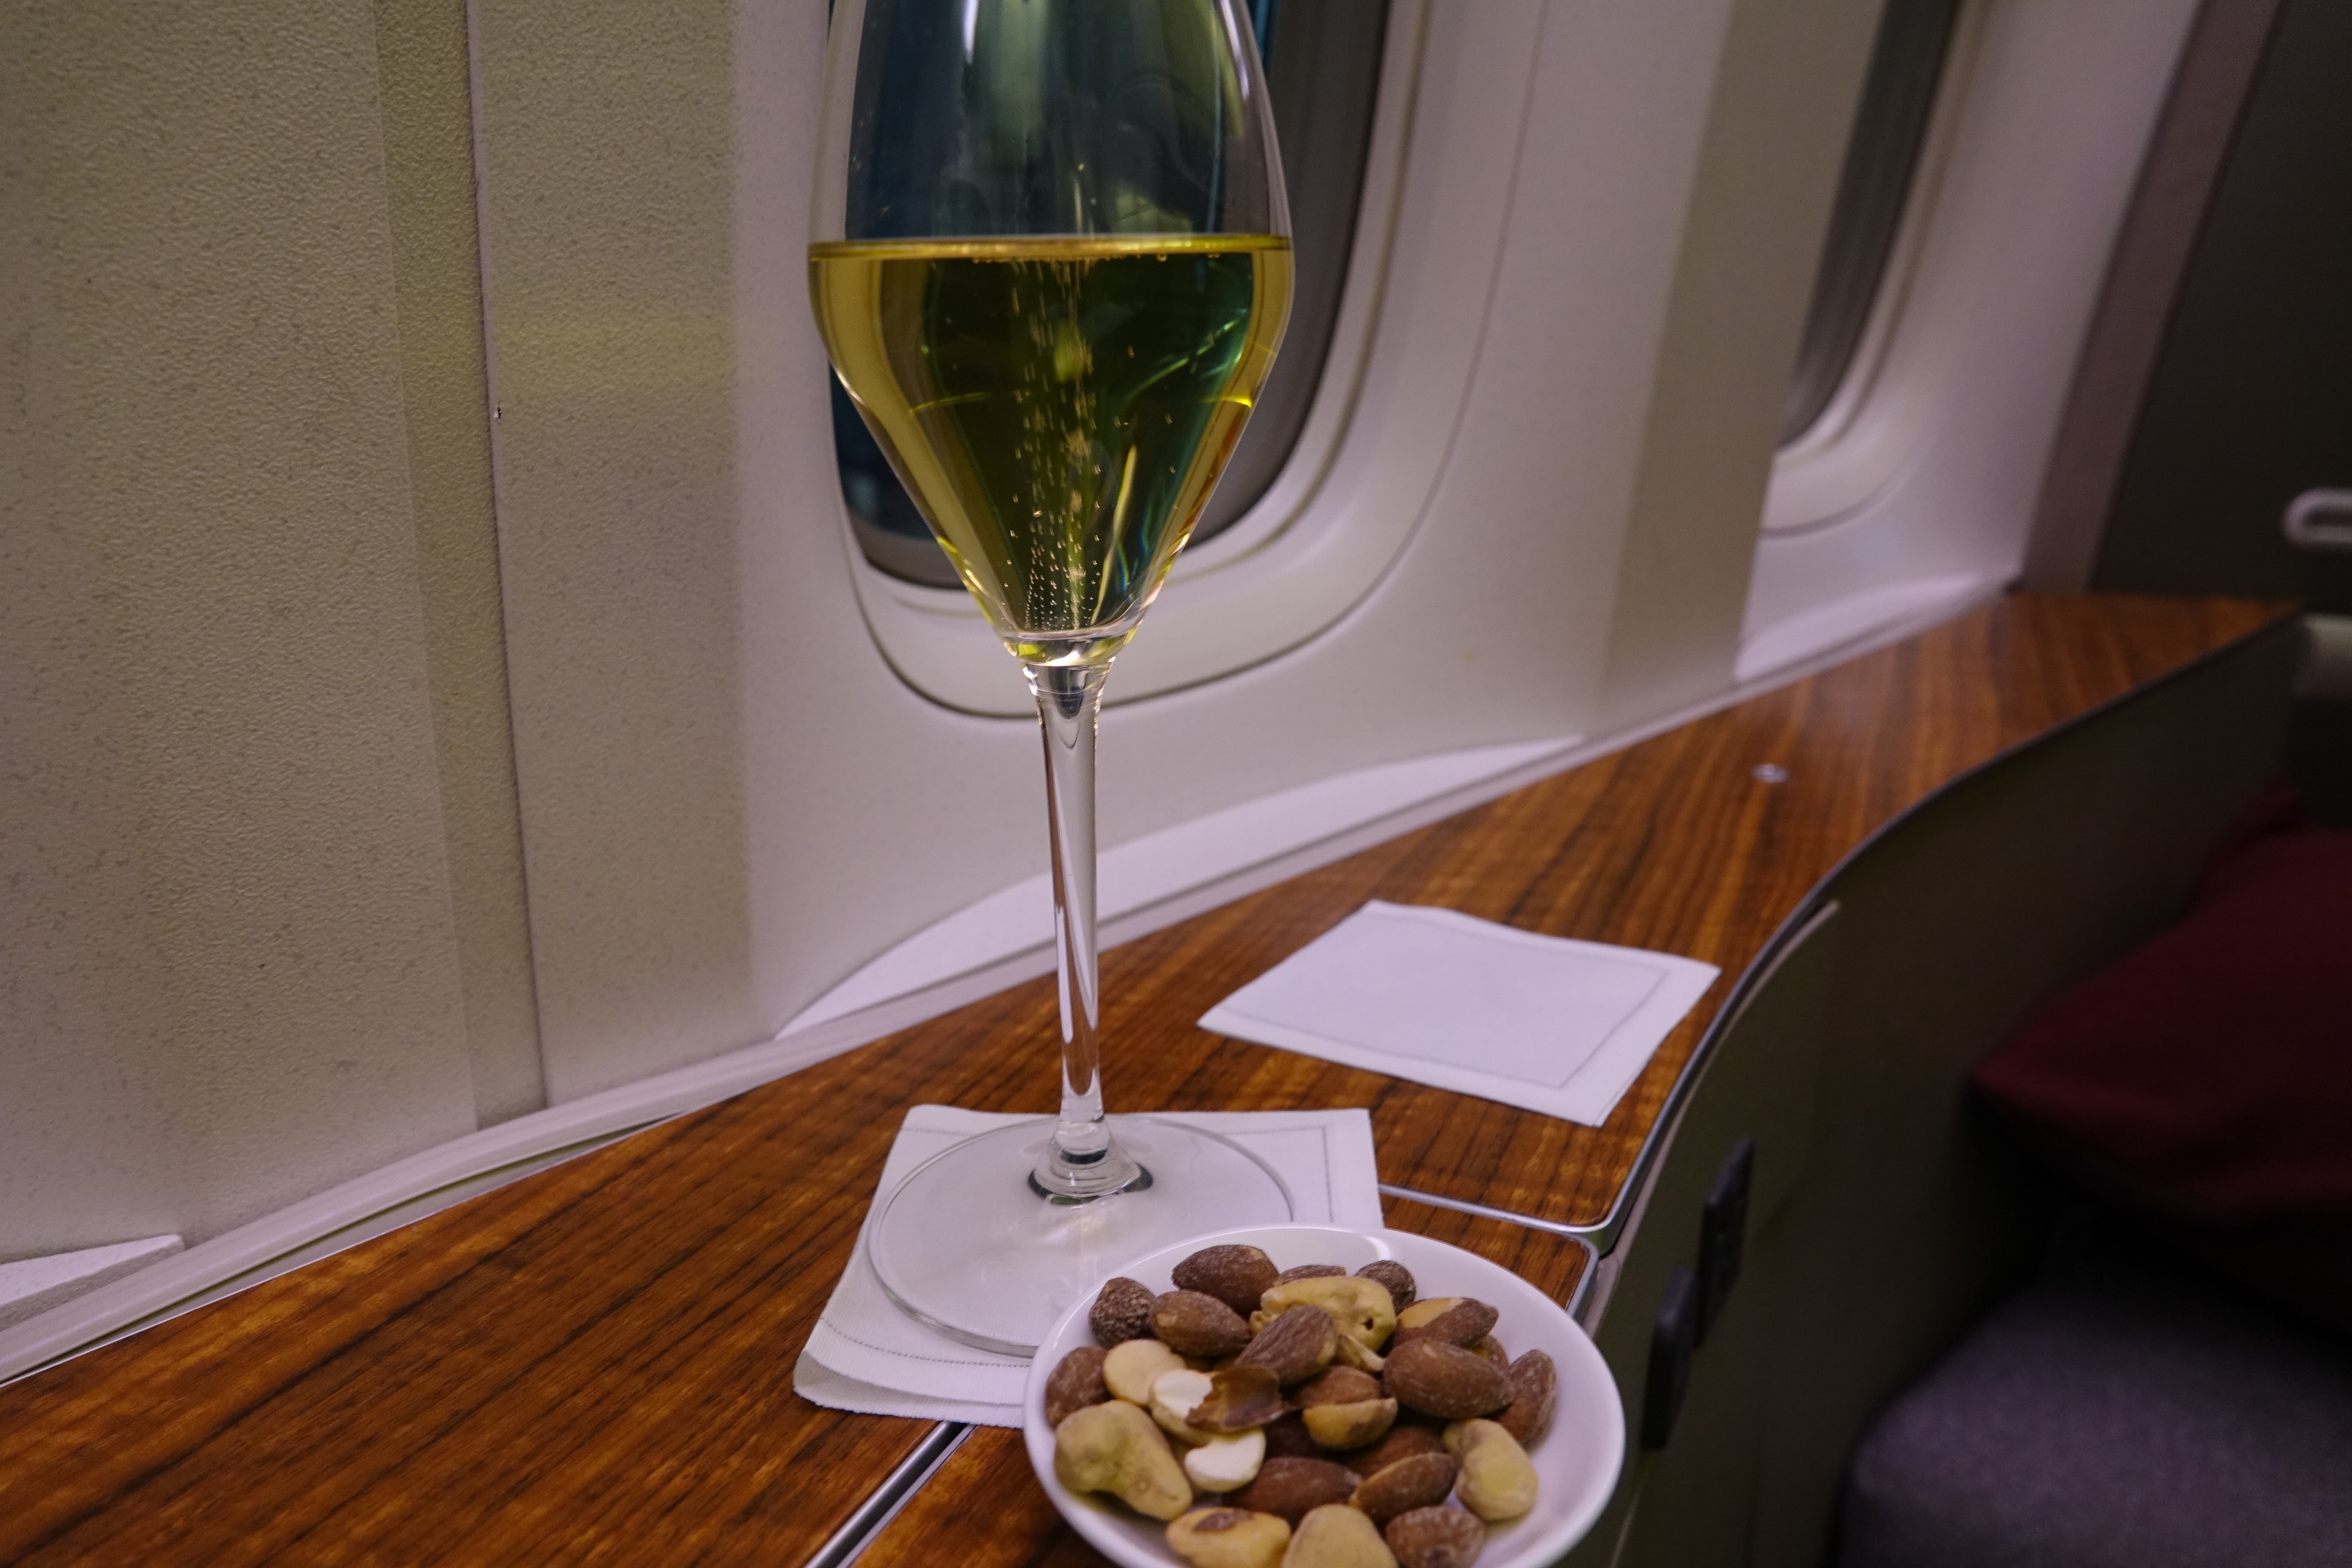 a glass of wine and a bowl of nuts on a table